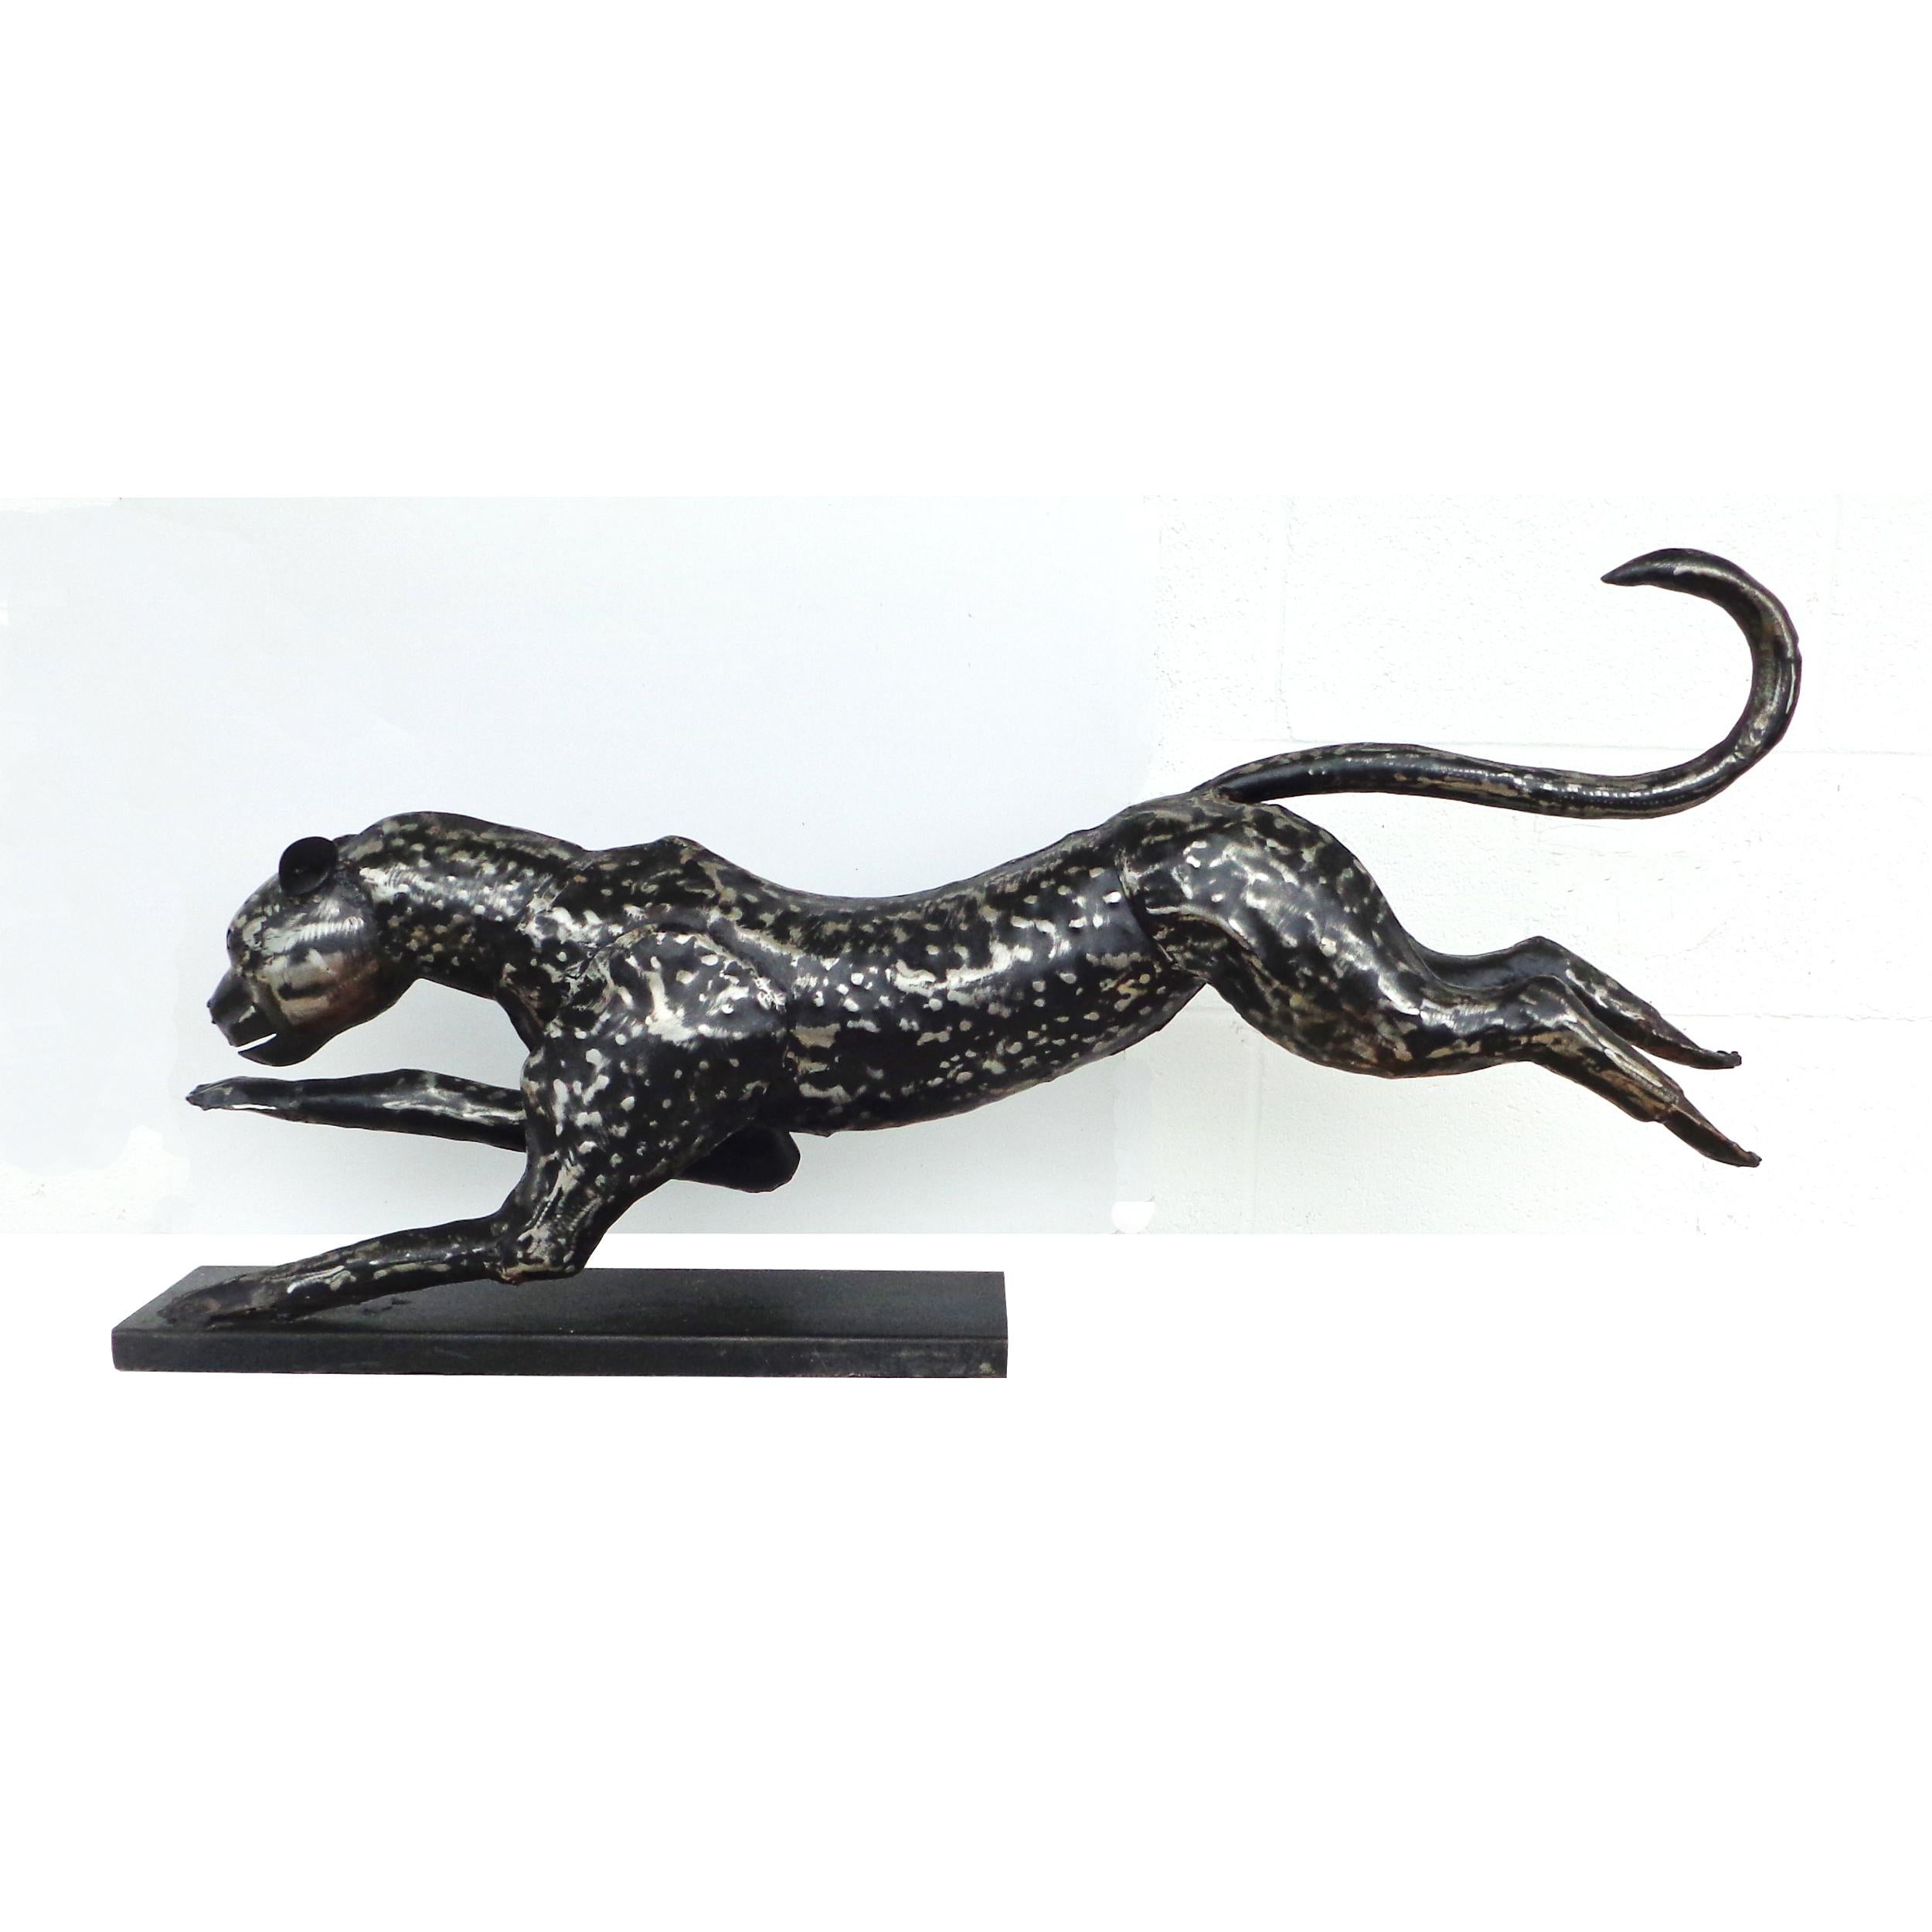 42″ Metal Cheetah

In motion resting on base.
Forged metal with ebony accents.

42″ W  x 7.5″ D x 20″ H